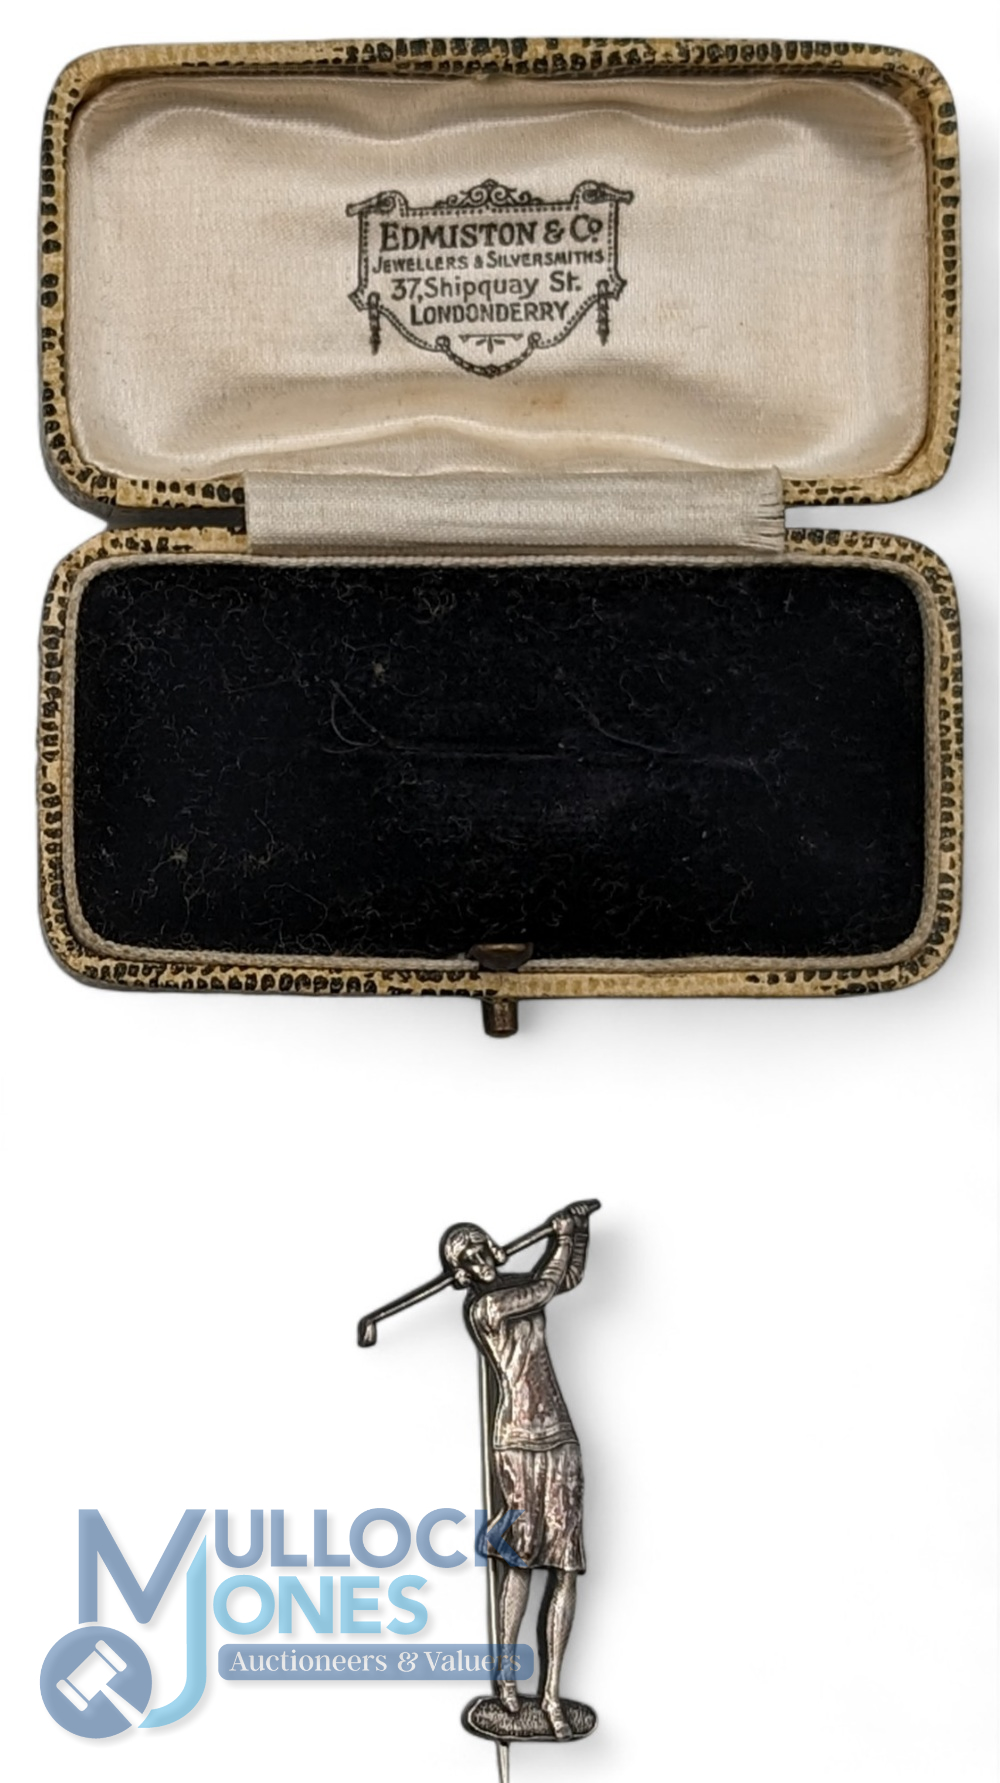 Sterling Silver Lady Golfer Brooch Badge, reg design No.756053, in period leather case - Image 2 of 2